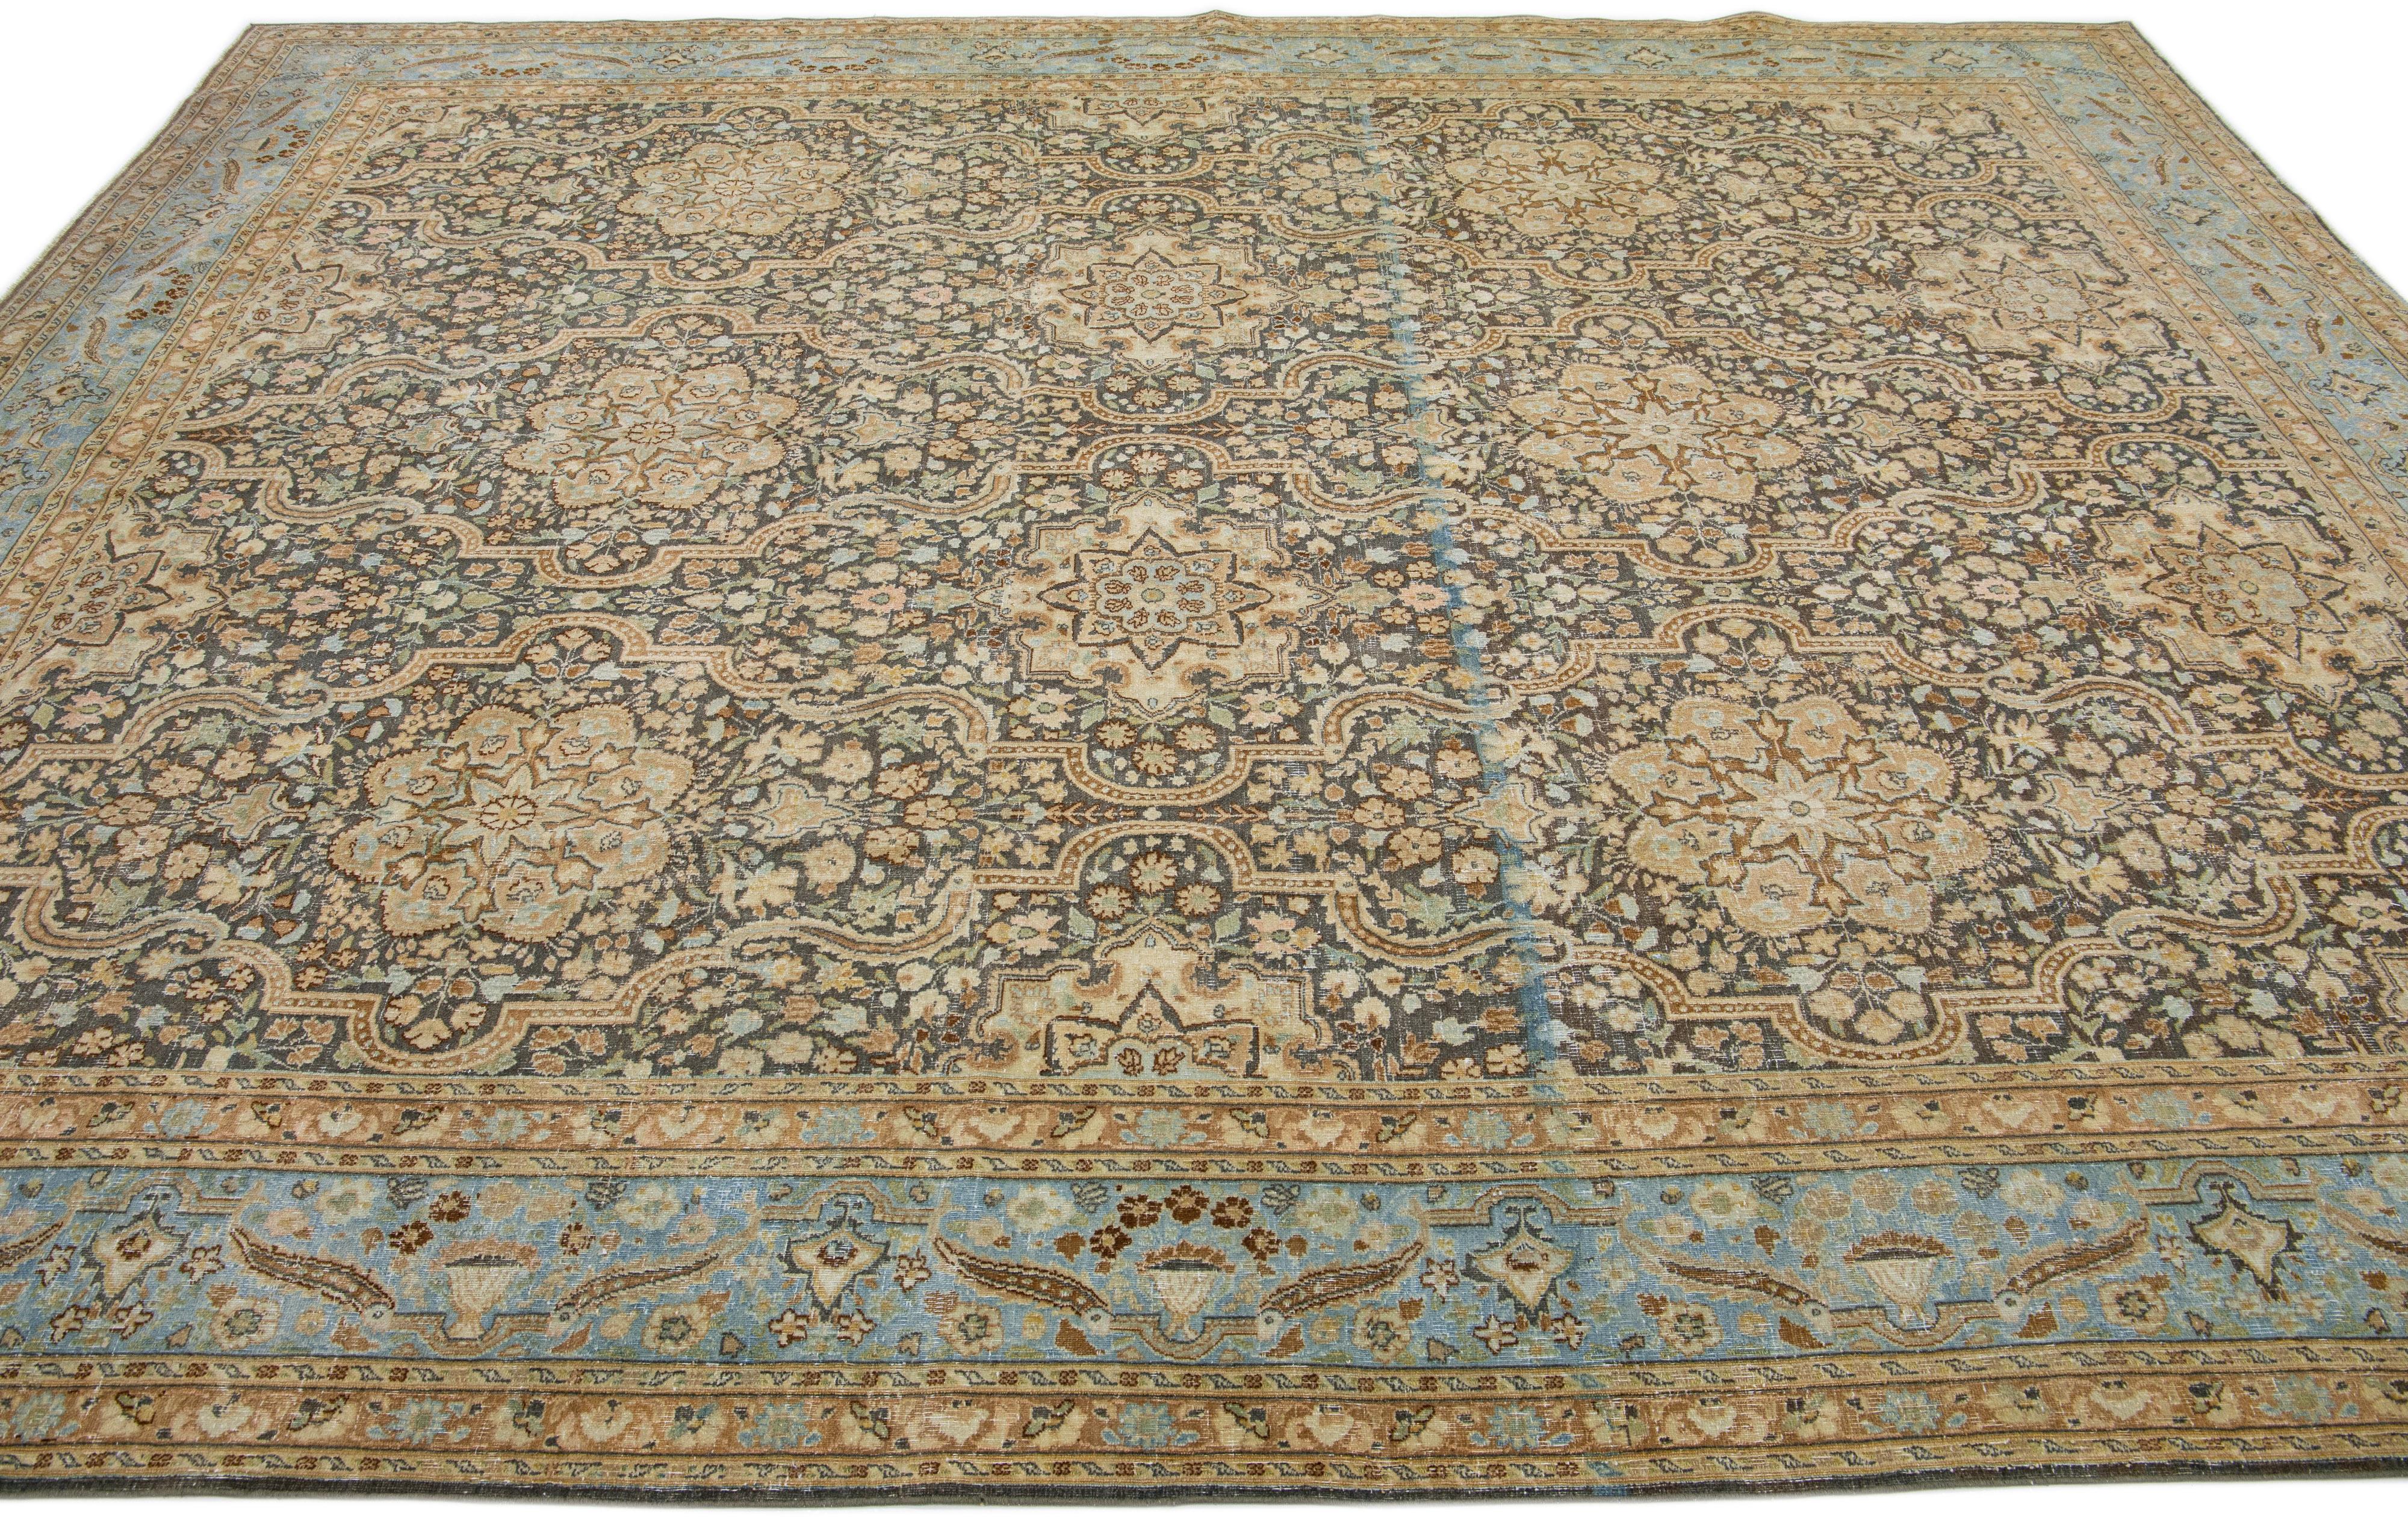 Allover Floral Vintage Handmade Persian Tabriz Wool Rug in Grey In Good Condition For Sale In Norwalk, CT